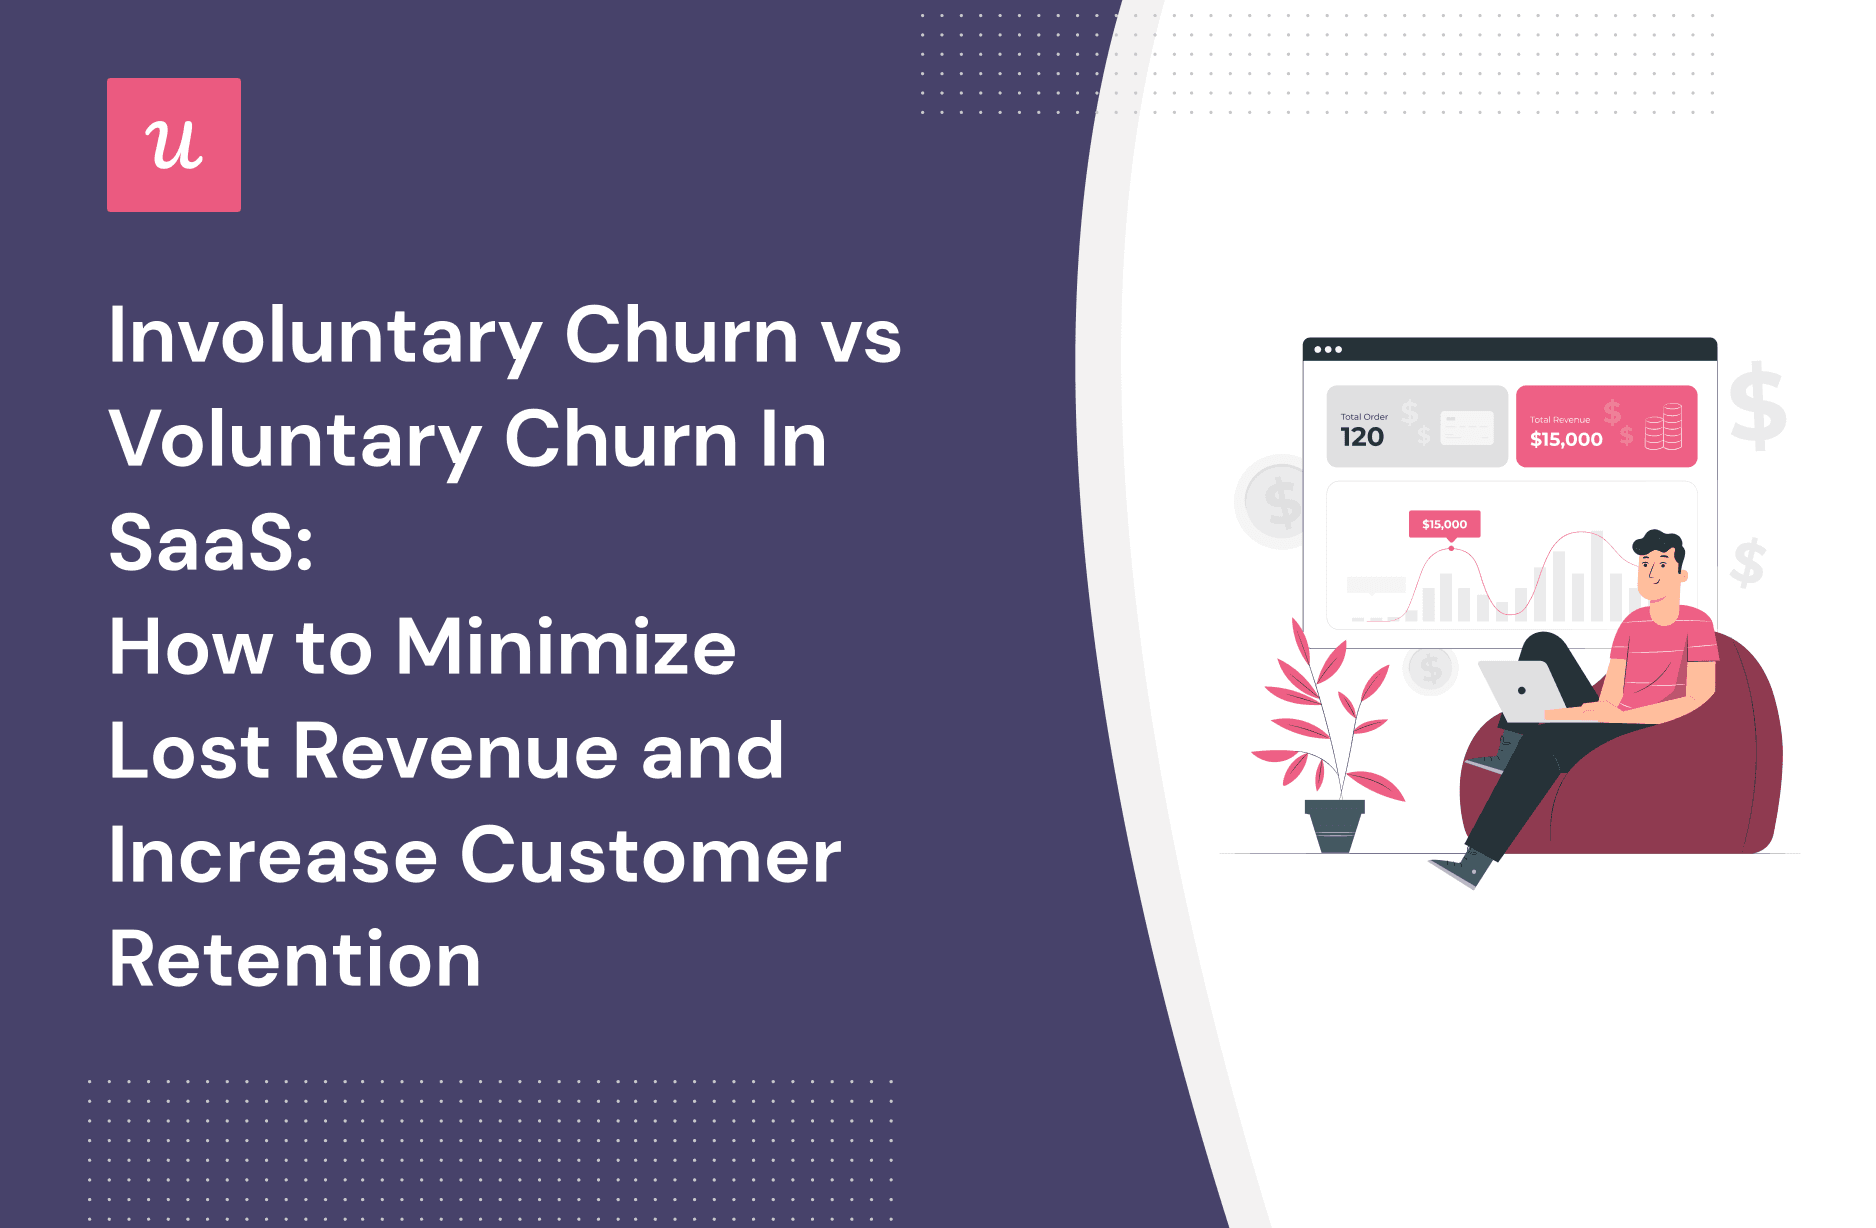 Involuntary Churn vs Voluntary Churn in SaaS: How to Minimize Lost Revenue and Increase Customer Retention cover